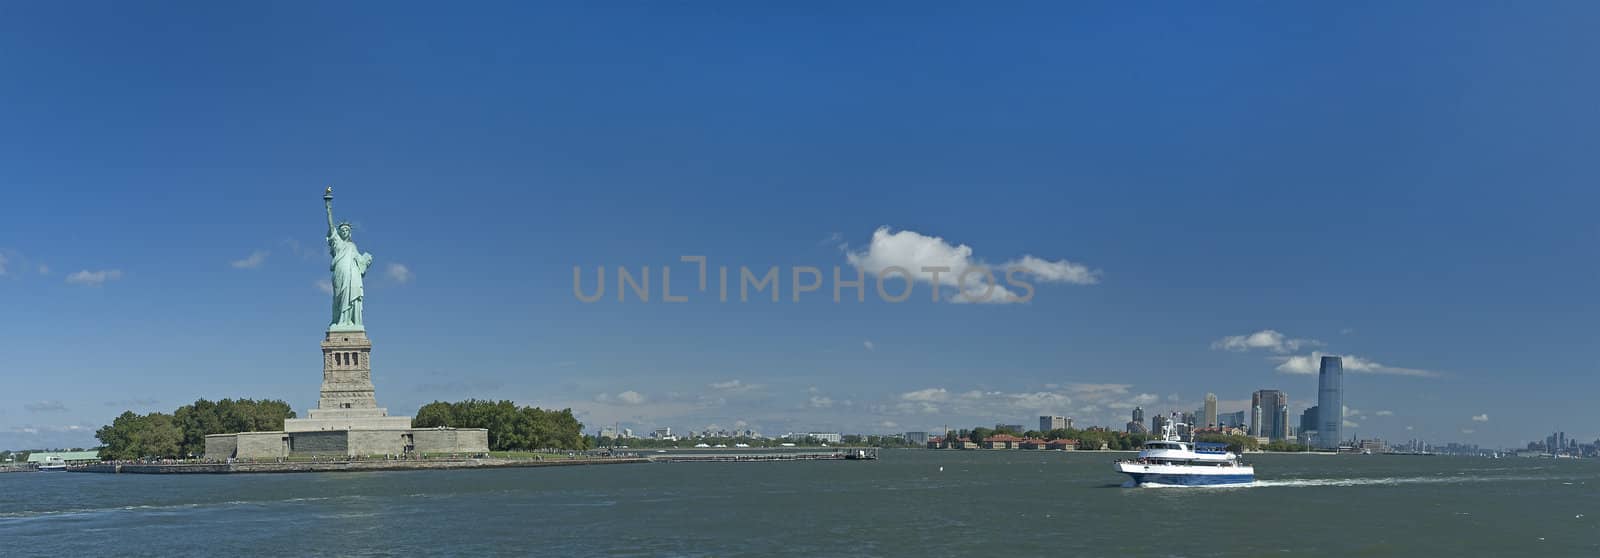 statue of liberty panorama by rorem